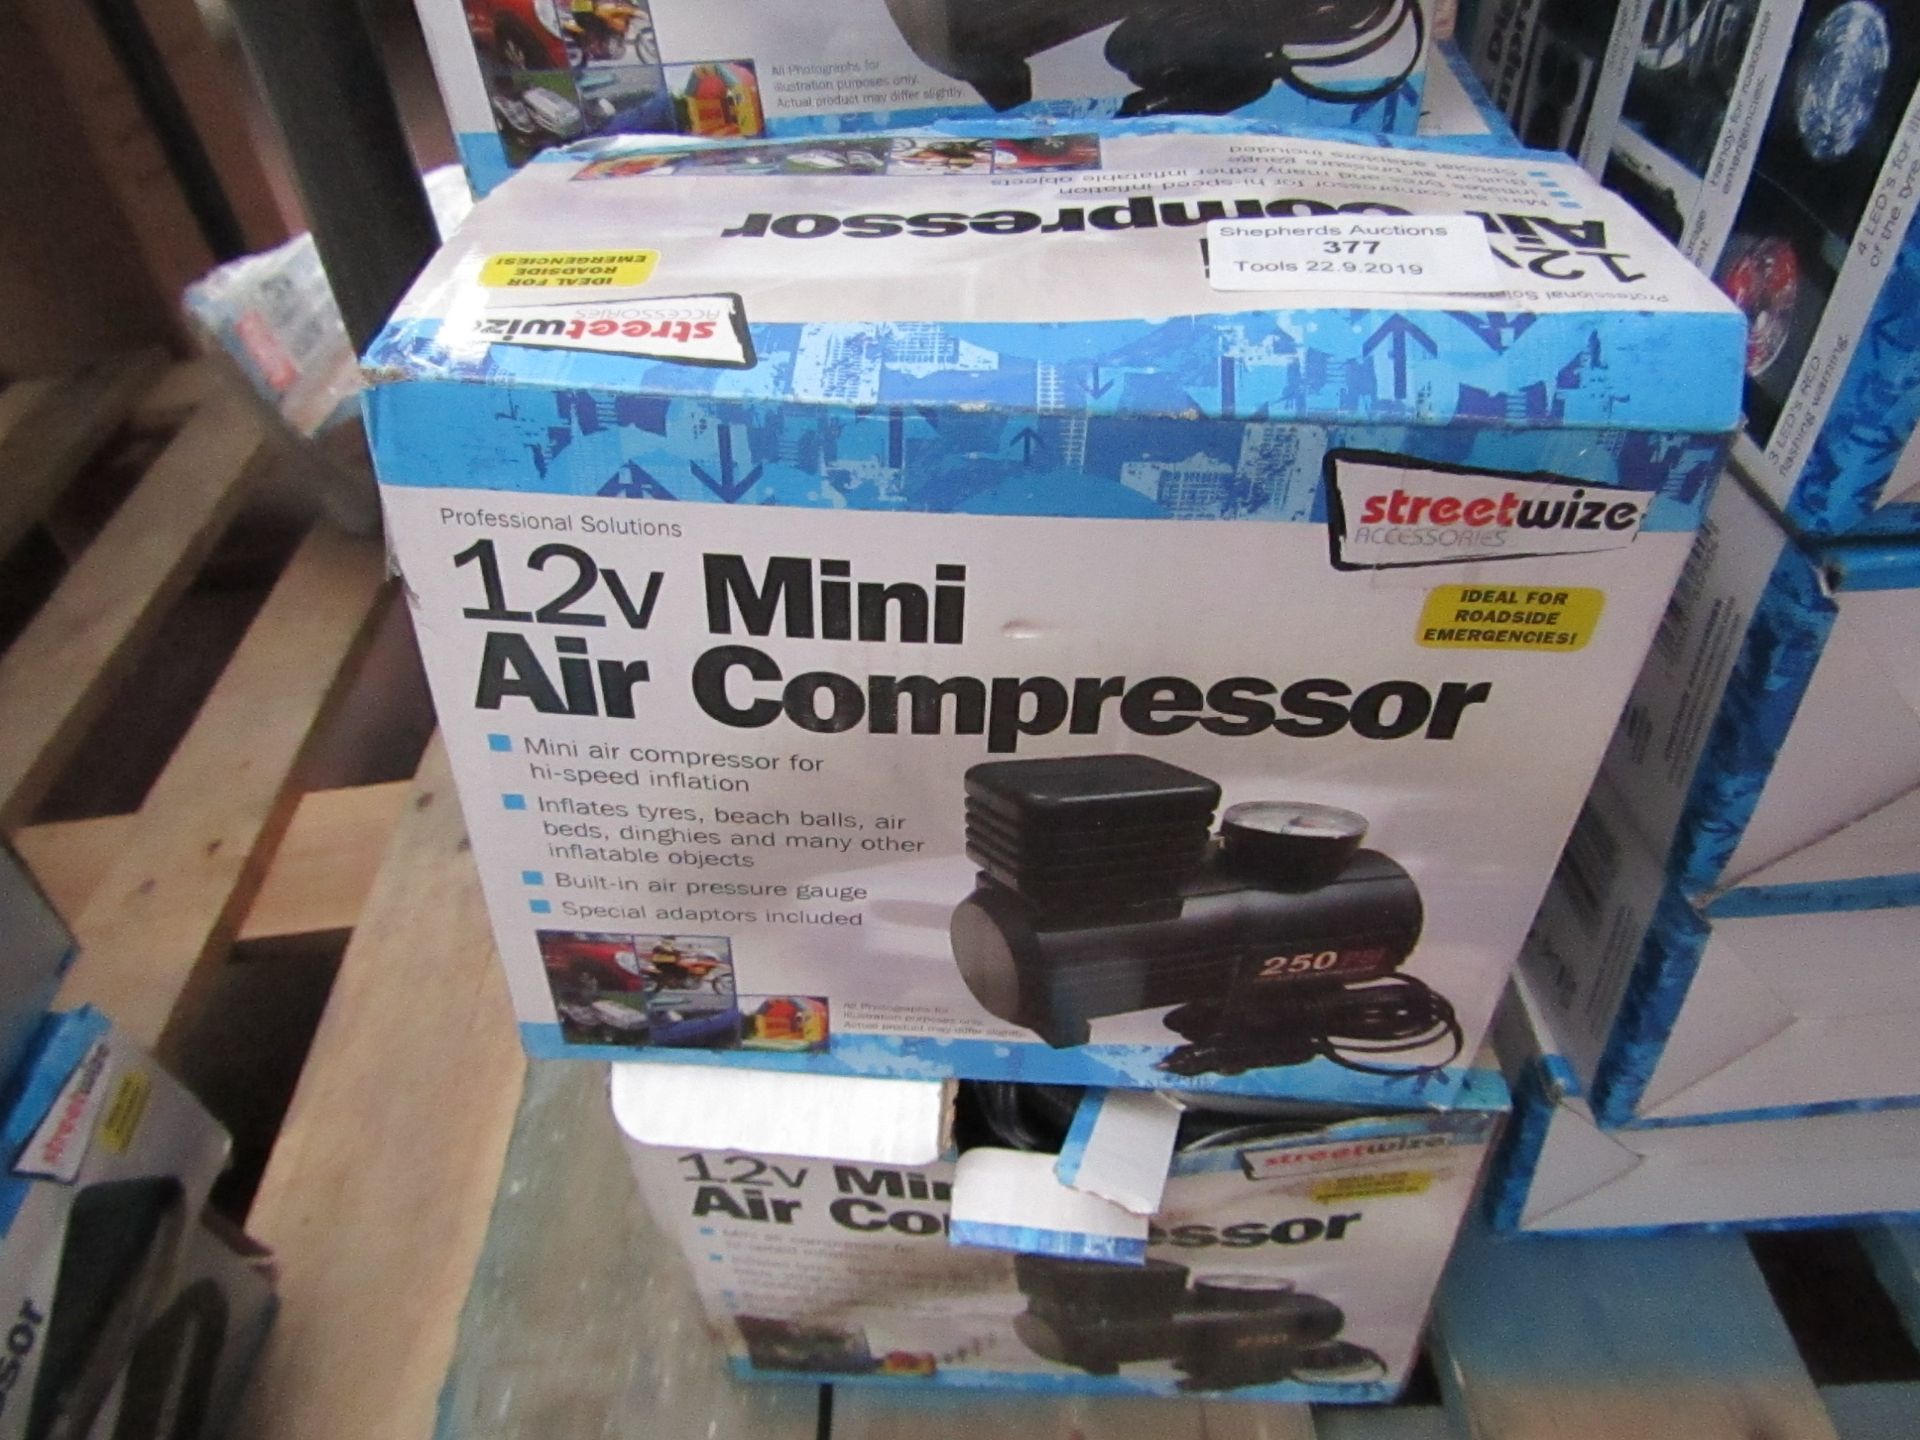 5x Streetwise 12V Air compressors, boxed and unchecked